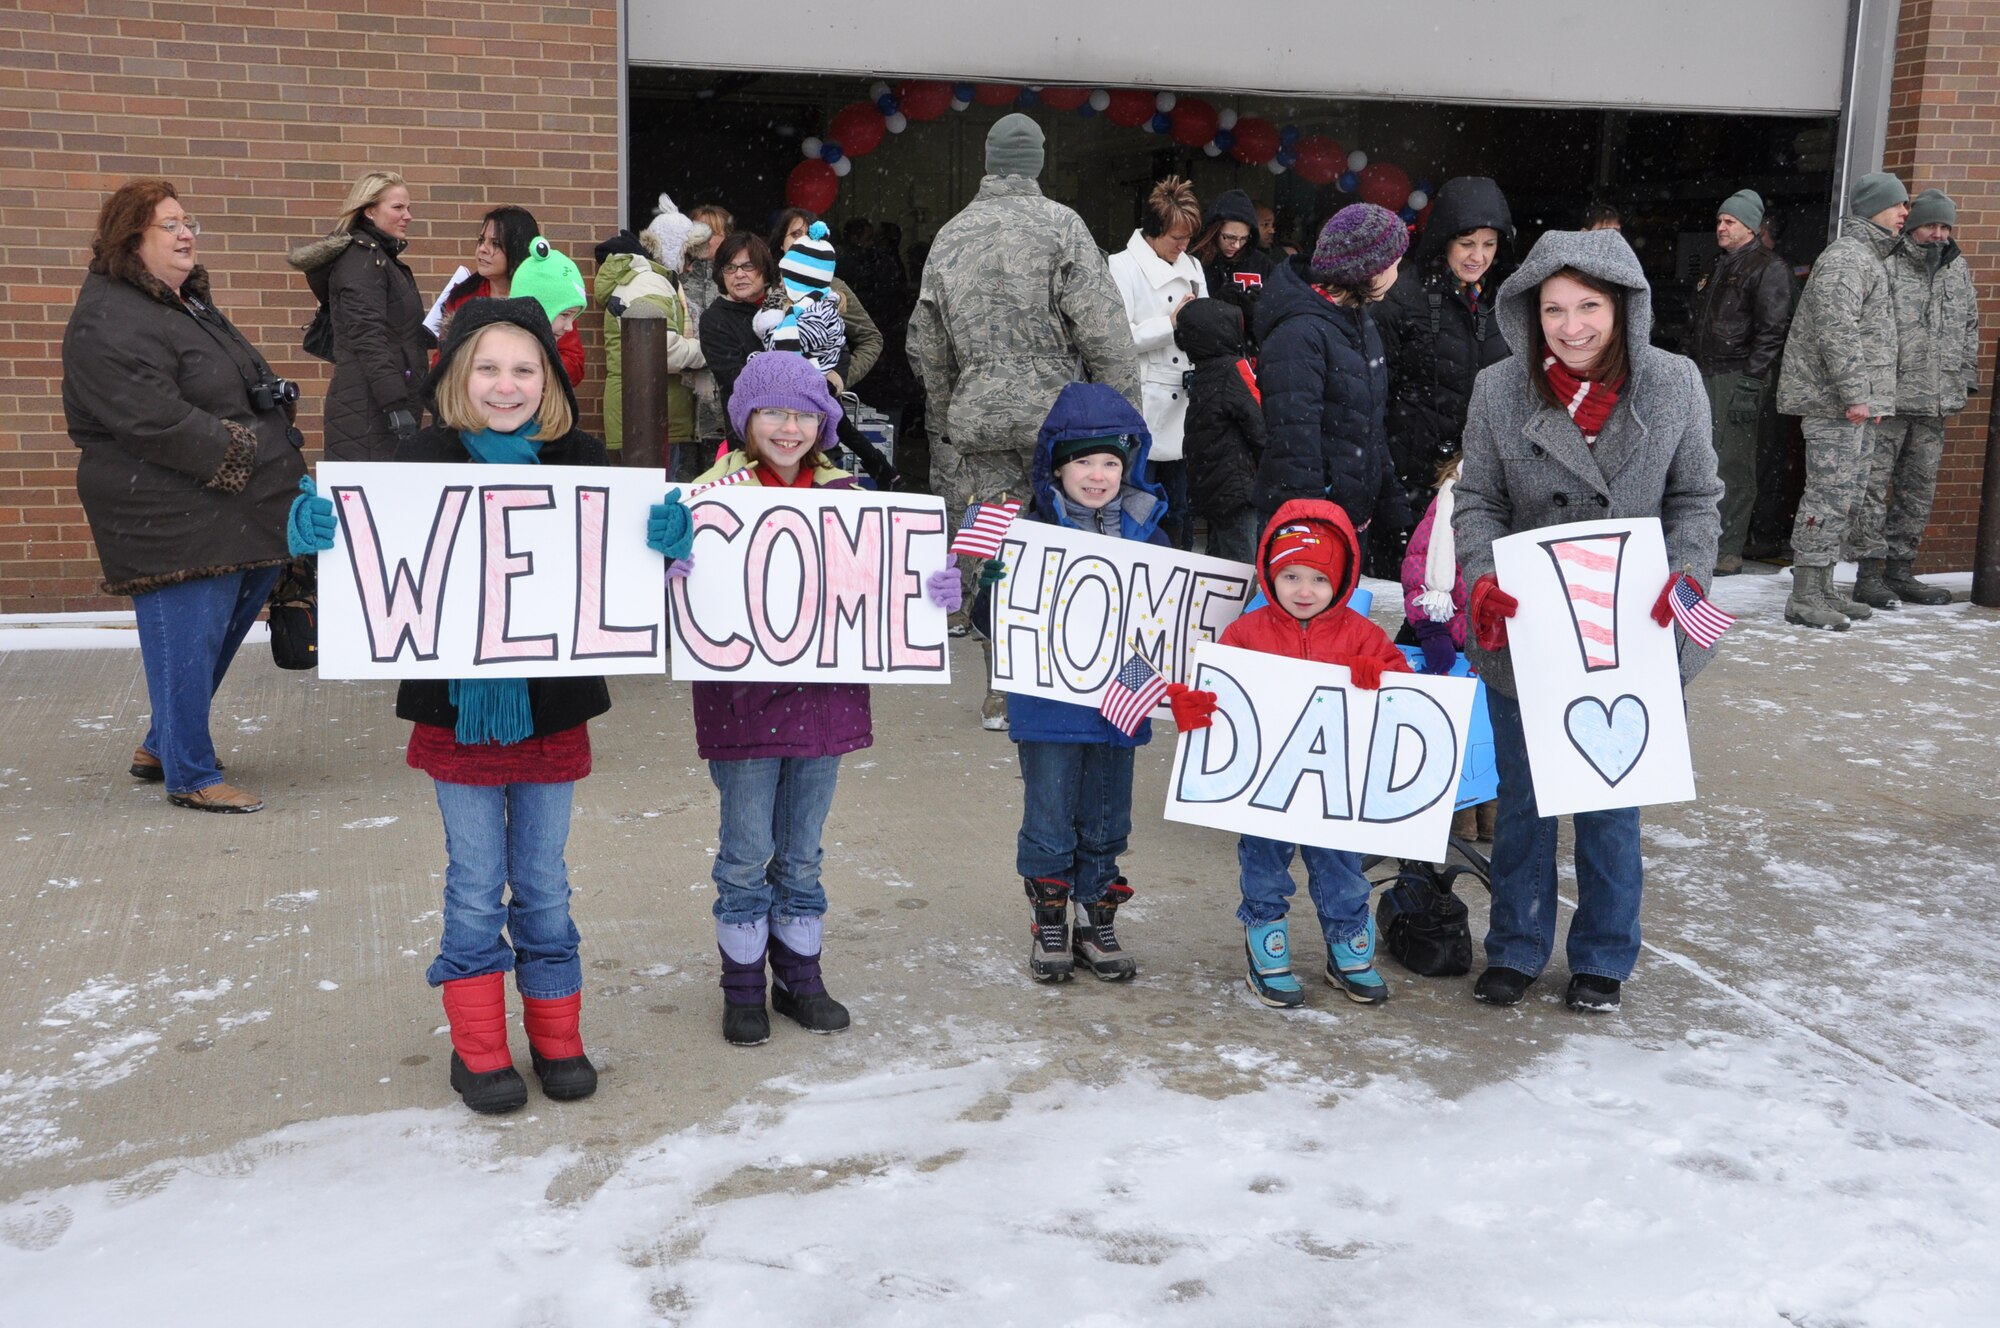 YOUNGSTOWN AIR RESERVE STATION, Ohio – The family of Air Force Reserve Staff Sgt. Christopher O’Neill, a loadmaster assigned to the 773rd Airlift Squadron, hold signs welcoming him home on the flightline here, Jan. 19, 2012. O’Neill is one of approximately 40 Citizen Airmen that are the last of more than 140 Air Force Reservists, assigned to the 910th Airlift Wing’s flying and maintenance squadrons based at YARS, returning to Northeast Ohio after a 120-day deployment to Southwest Asia that supported to airlift operations to various military installations throughout the U.S. Central Command (USCENTCOM) Area of Operations (AOR). U.S. Air Force photo by Master Sgt. Bob Barko Jr.